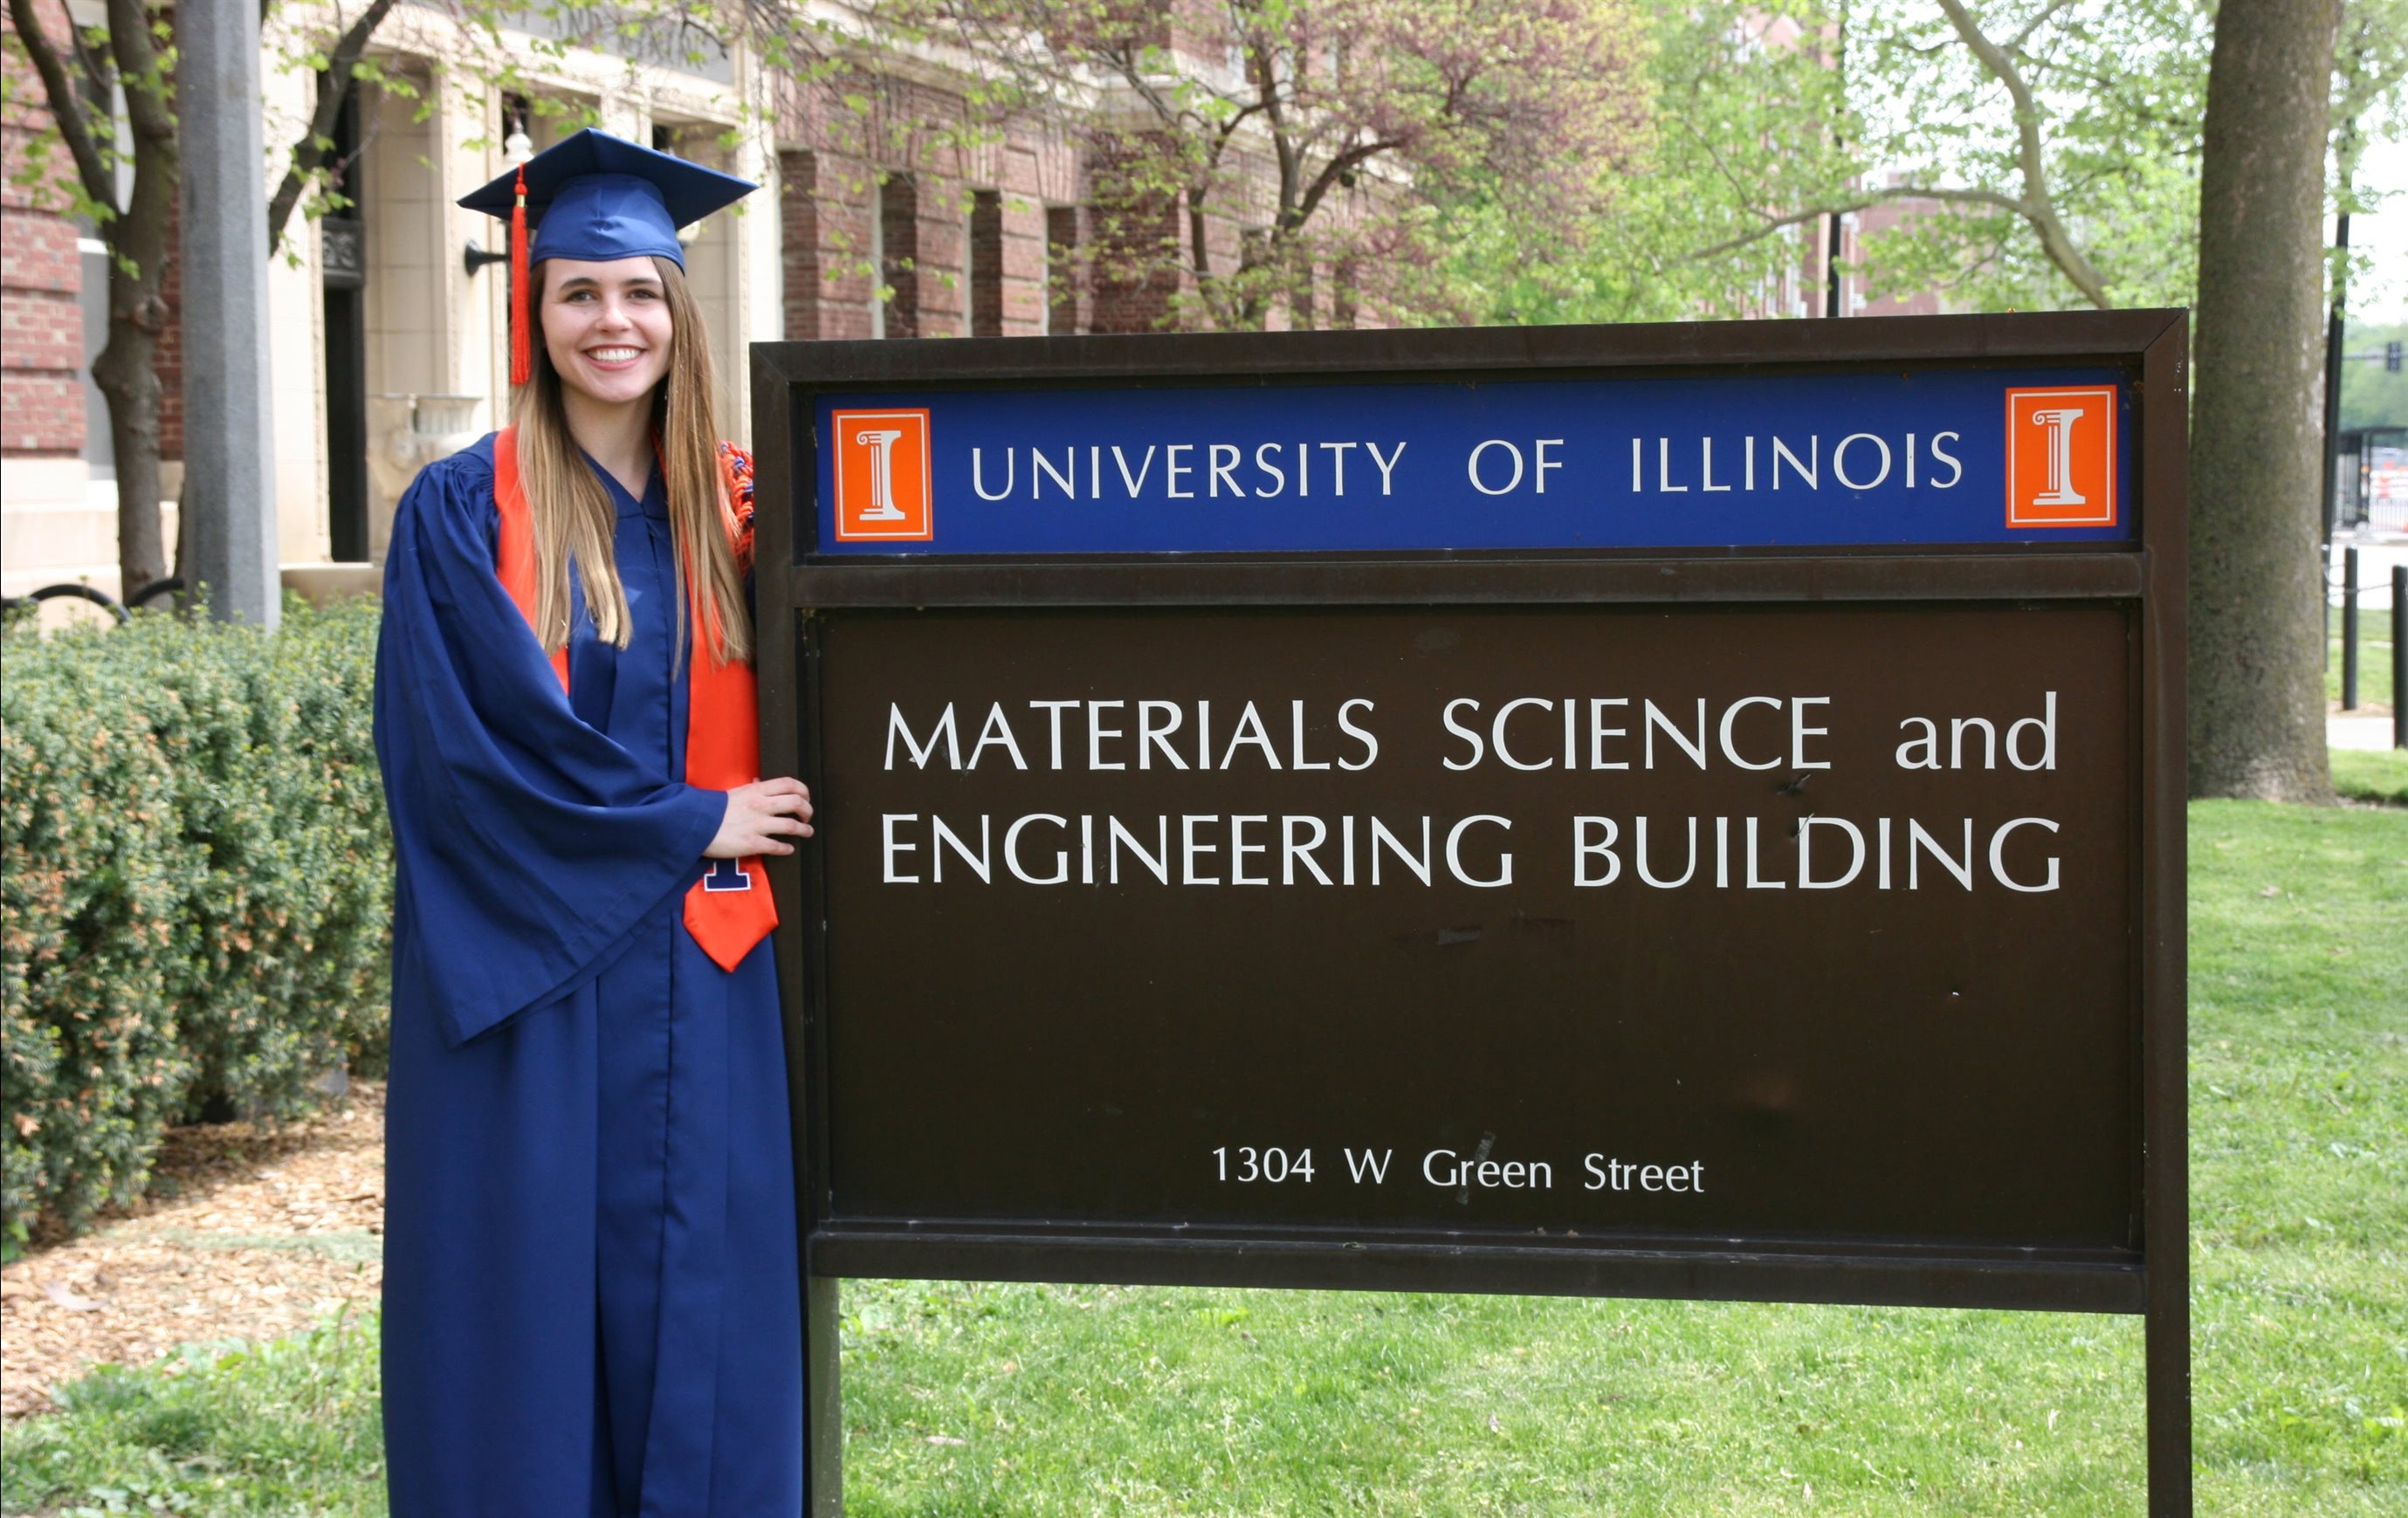 Lauren (Smith) Fey, an '18 MatSE alumnus and now computational researcher and doctoral student at the University of California, Santa Barbara, is all smiles in her graduation regalia outside the Materials Science and Engineering Building on Green Street in Urbana, Ill.